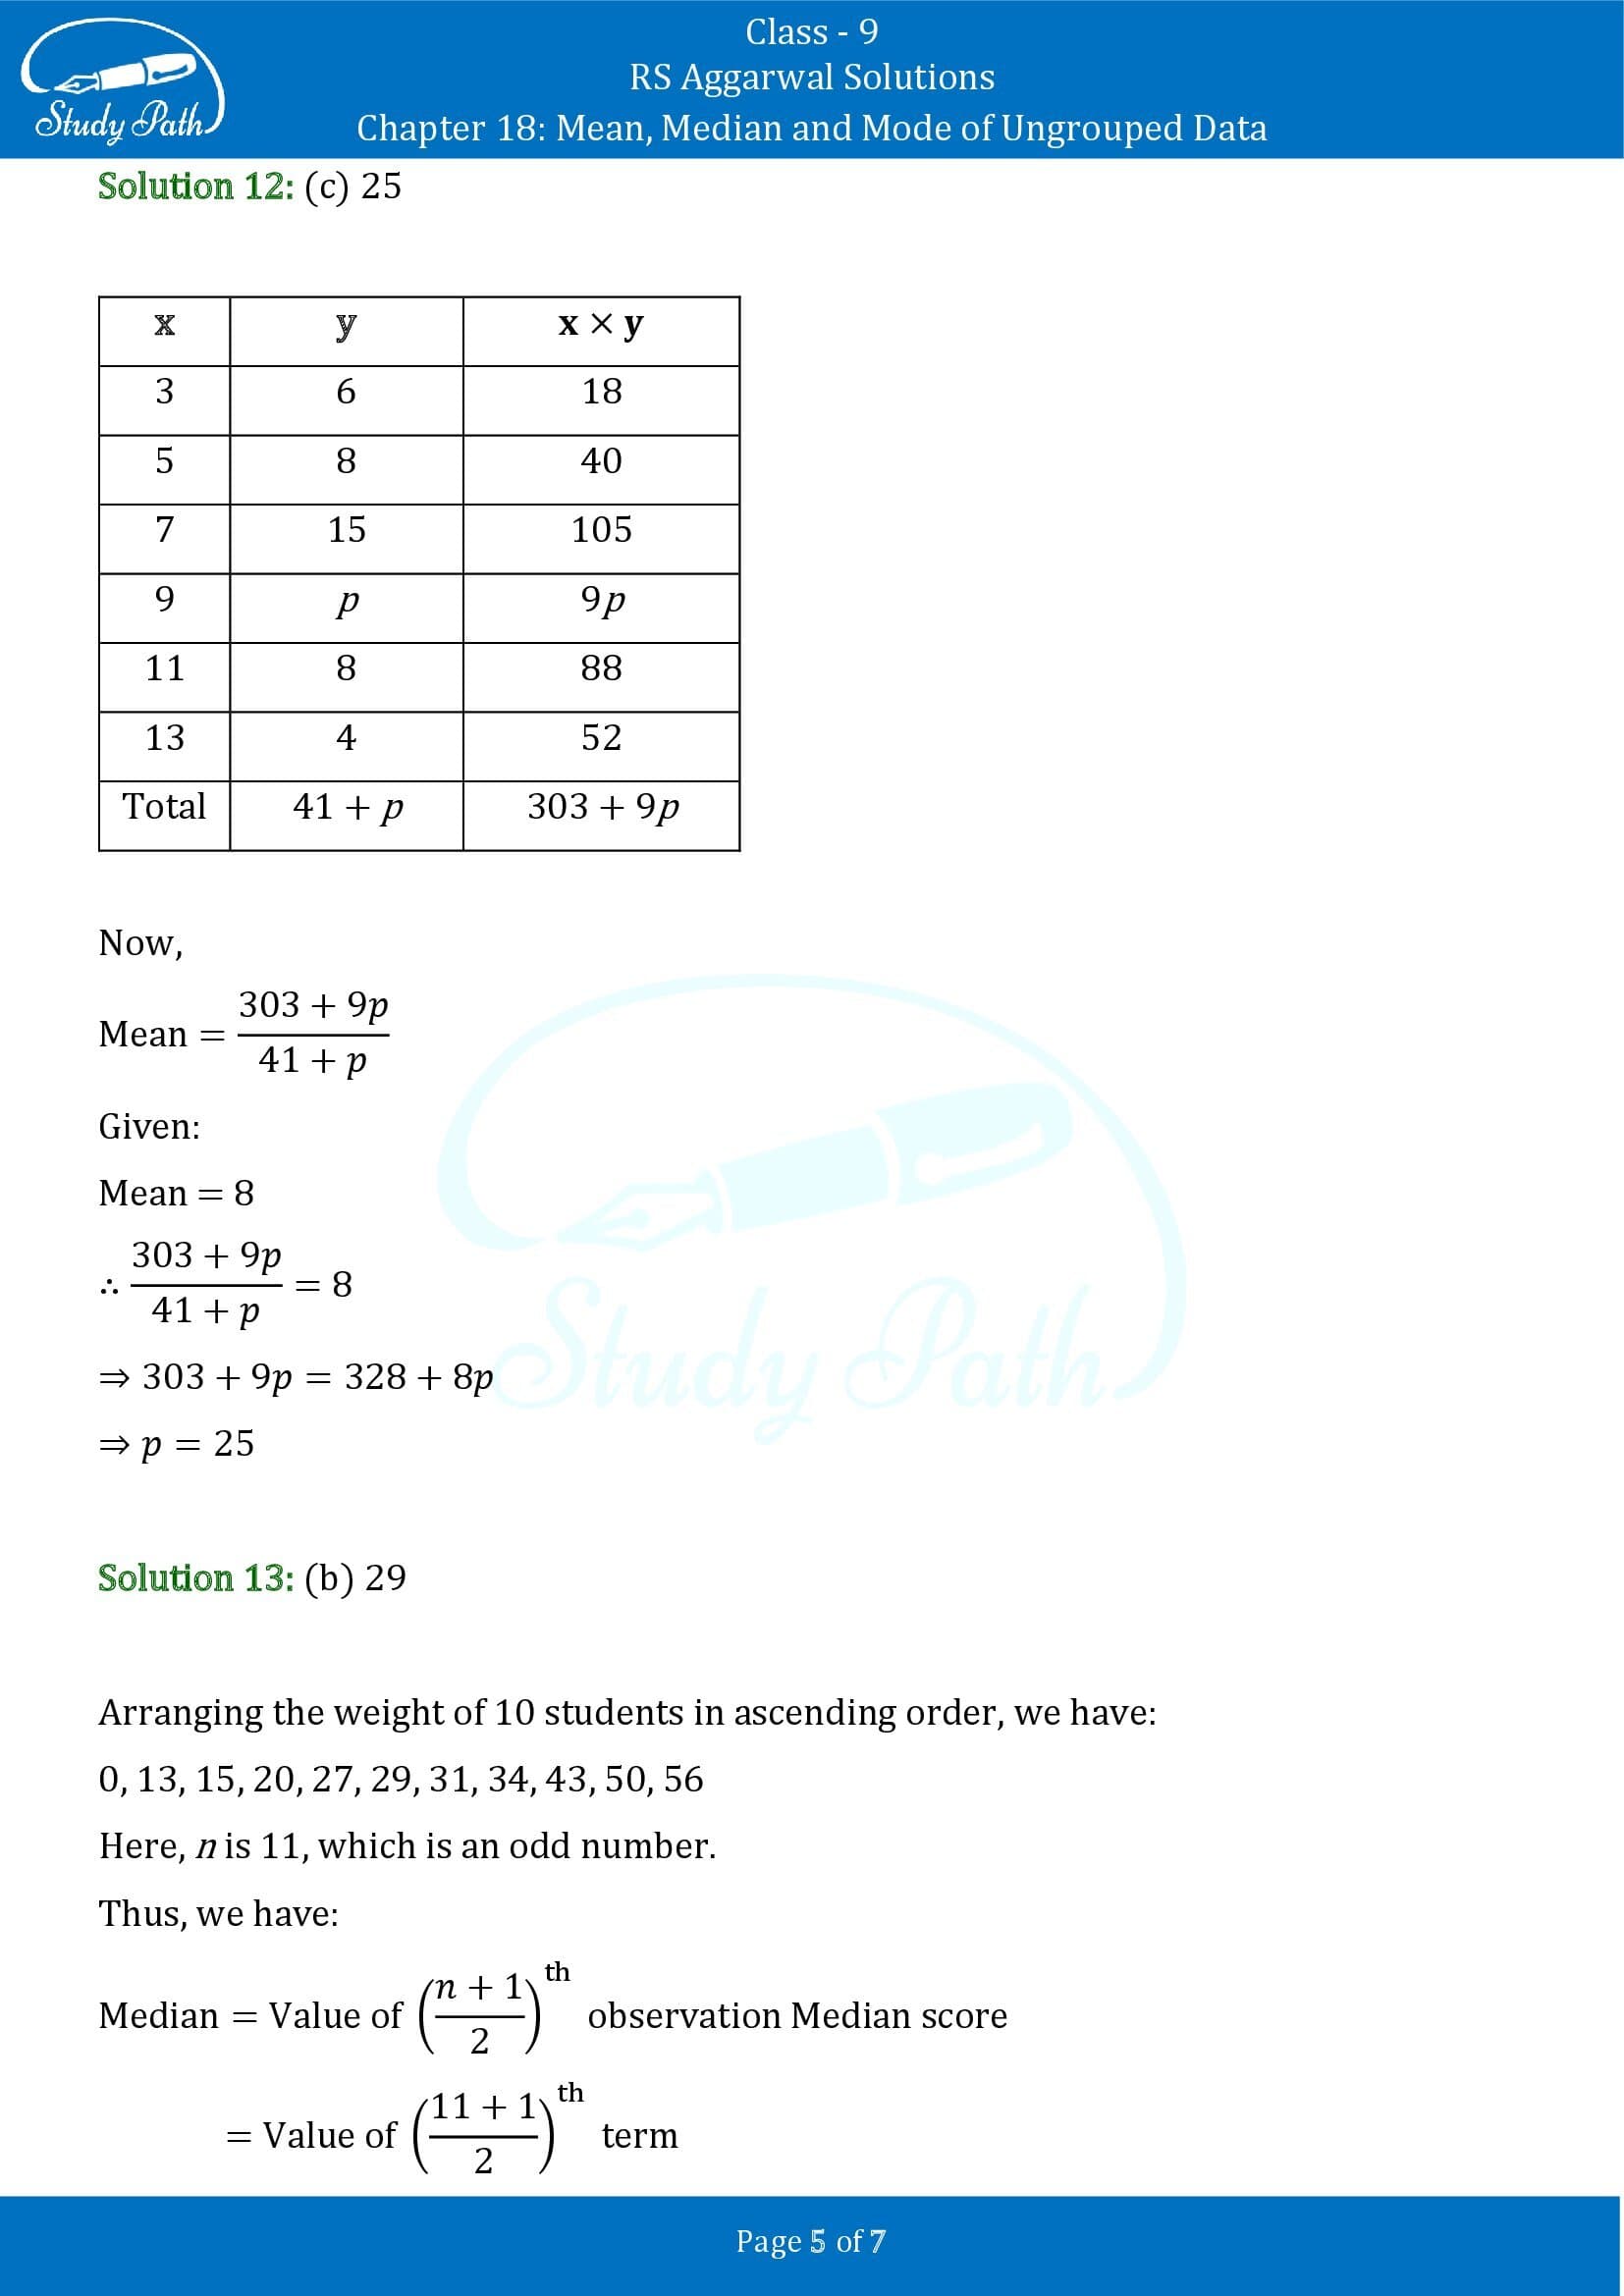 RS Aggarwal Solutions Class 9 Chapter 18 Mean Median and Mode of Ungrouped Data Multiple Choice Questions MCQs 00005